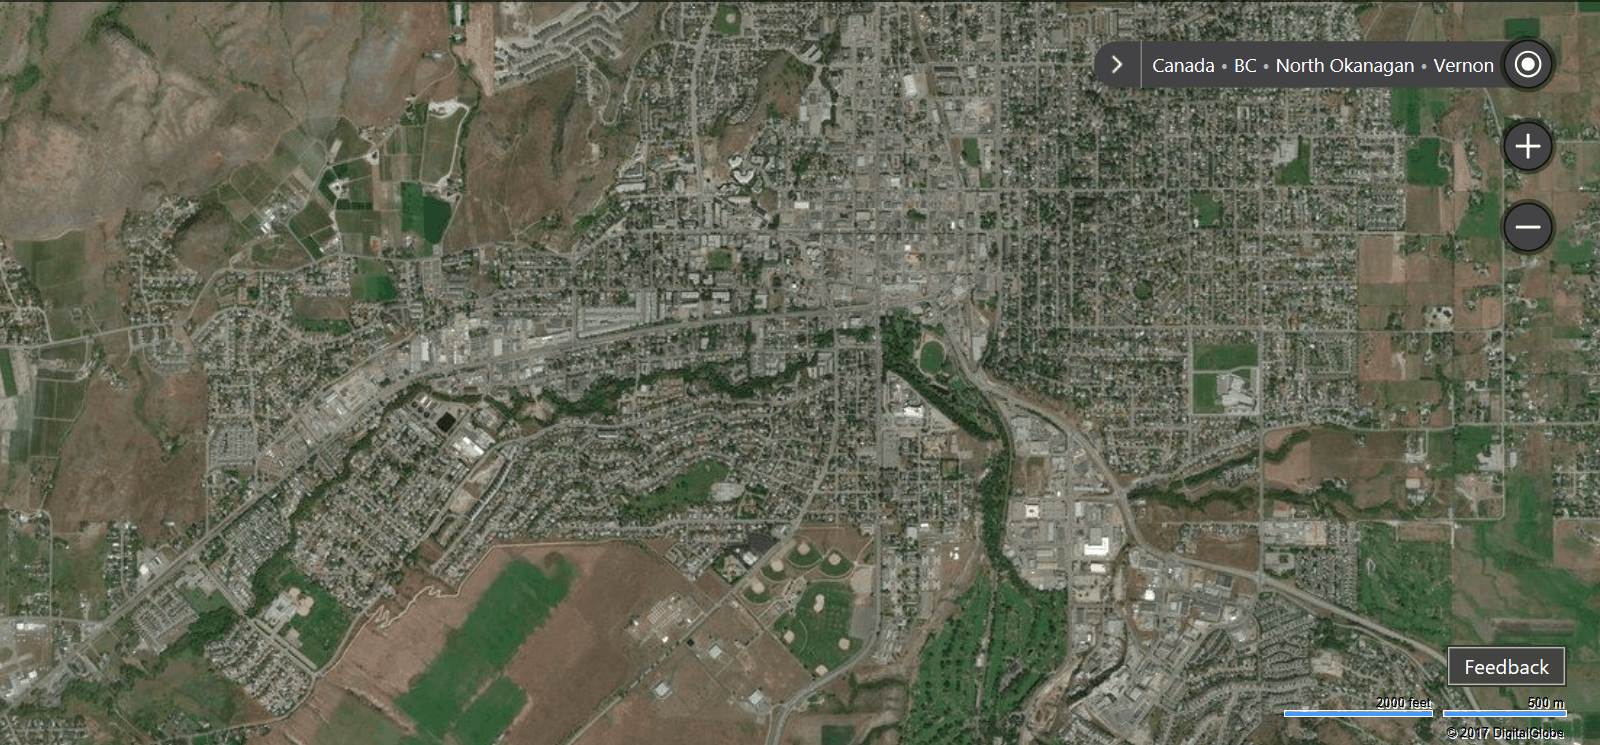 Bing maps publishes 2. 1 million square kilometers of new imagery for western canada - onmsft. Com - march 6, 2017